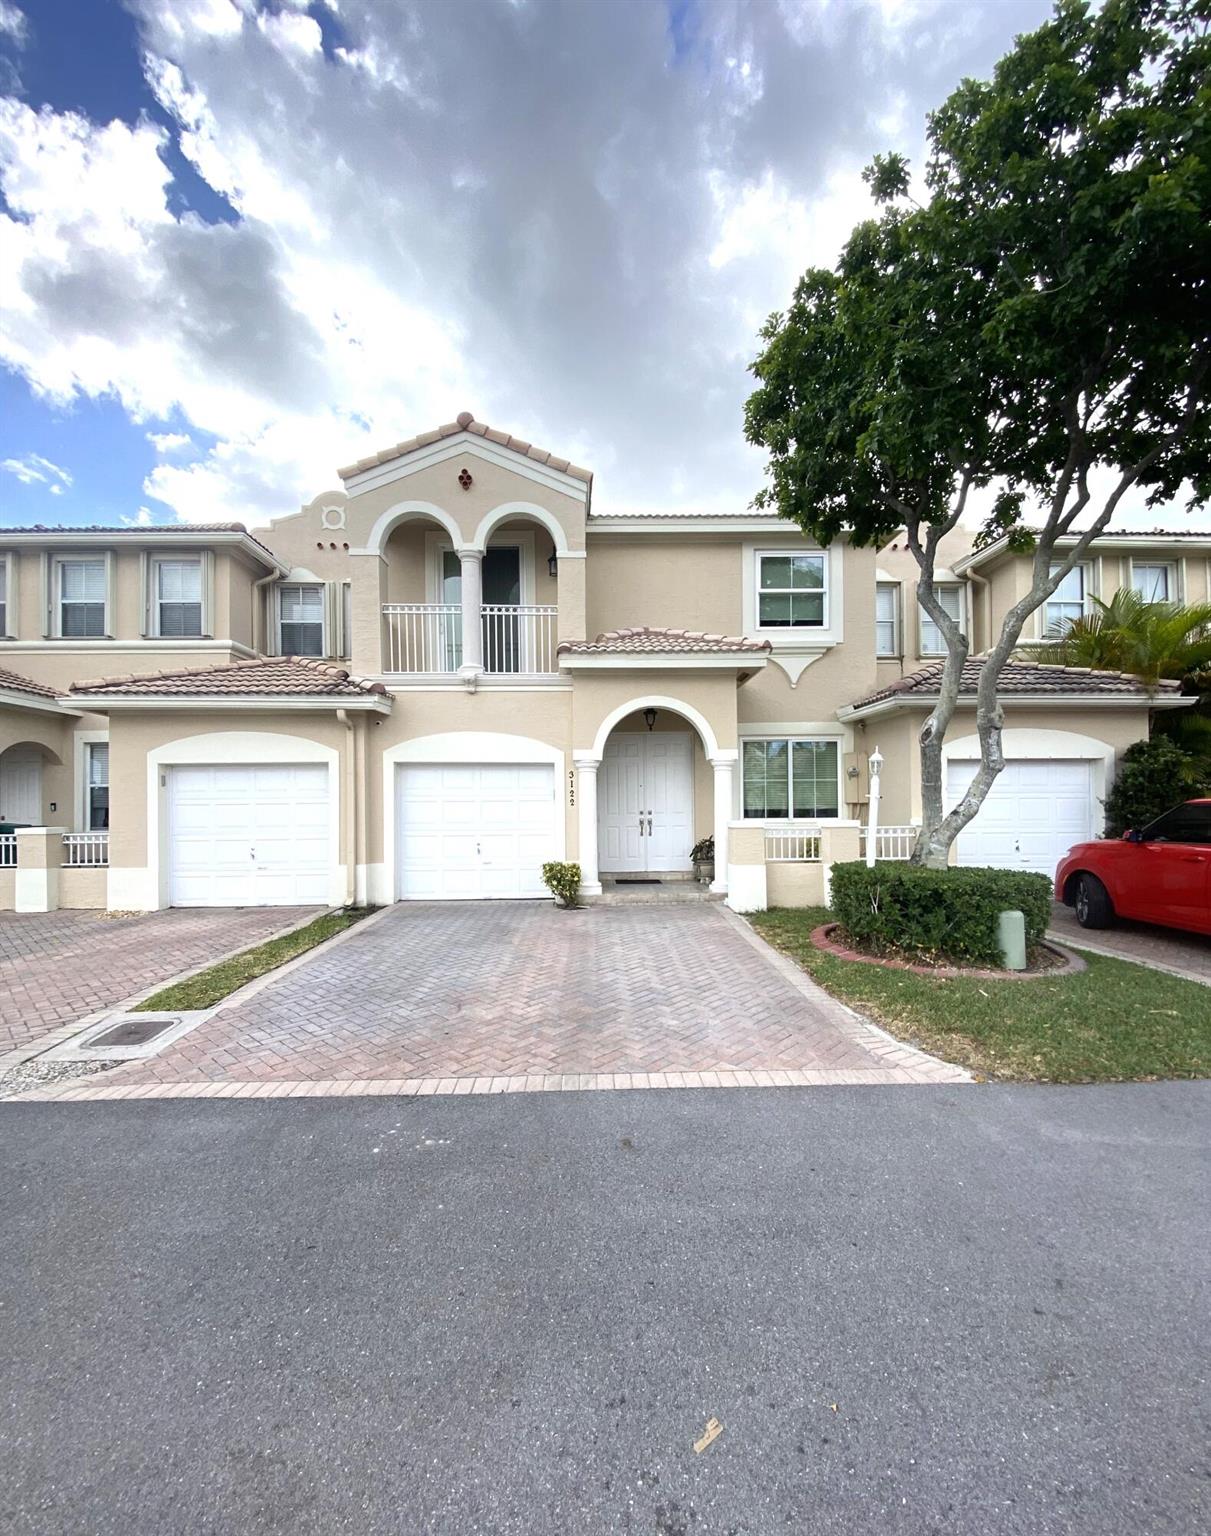 View Doral, FL 33172 townhome